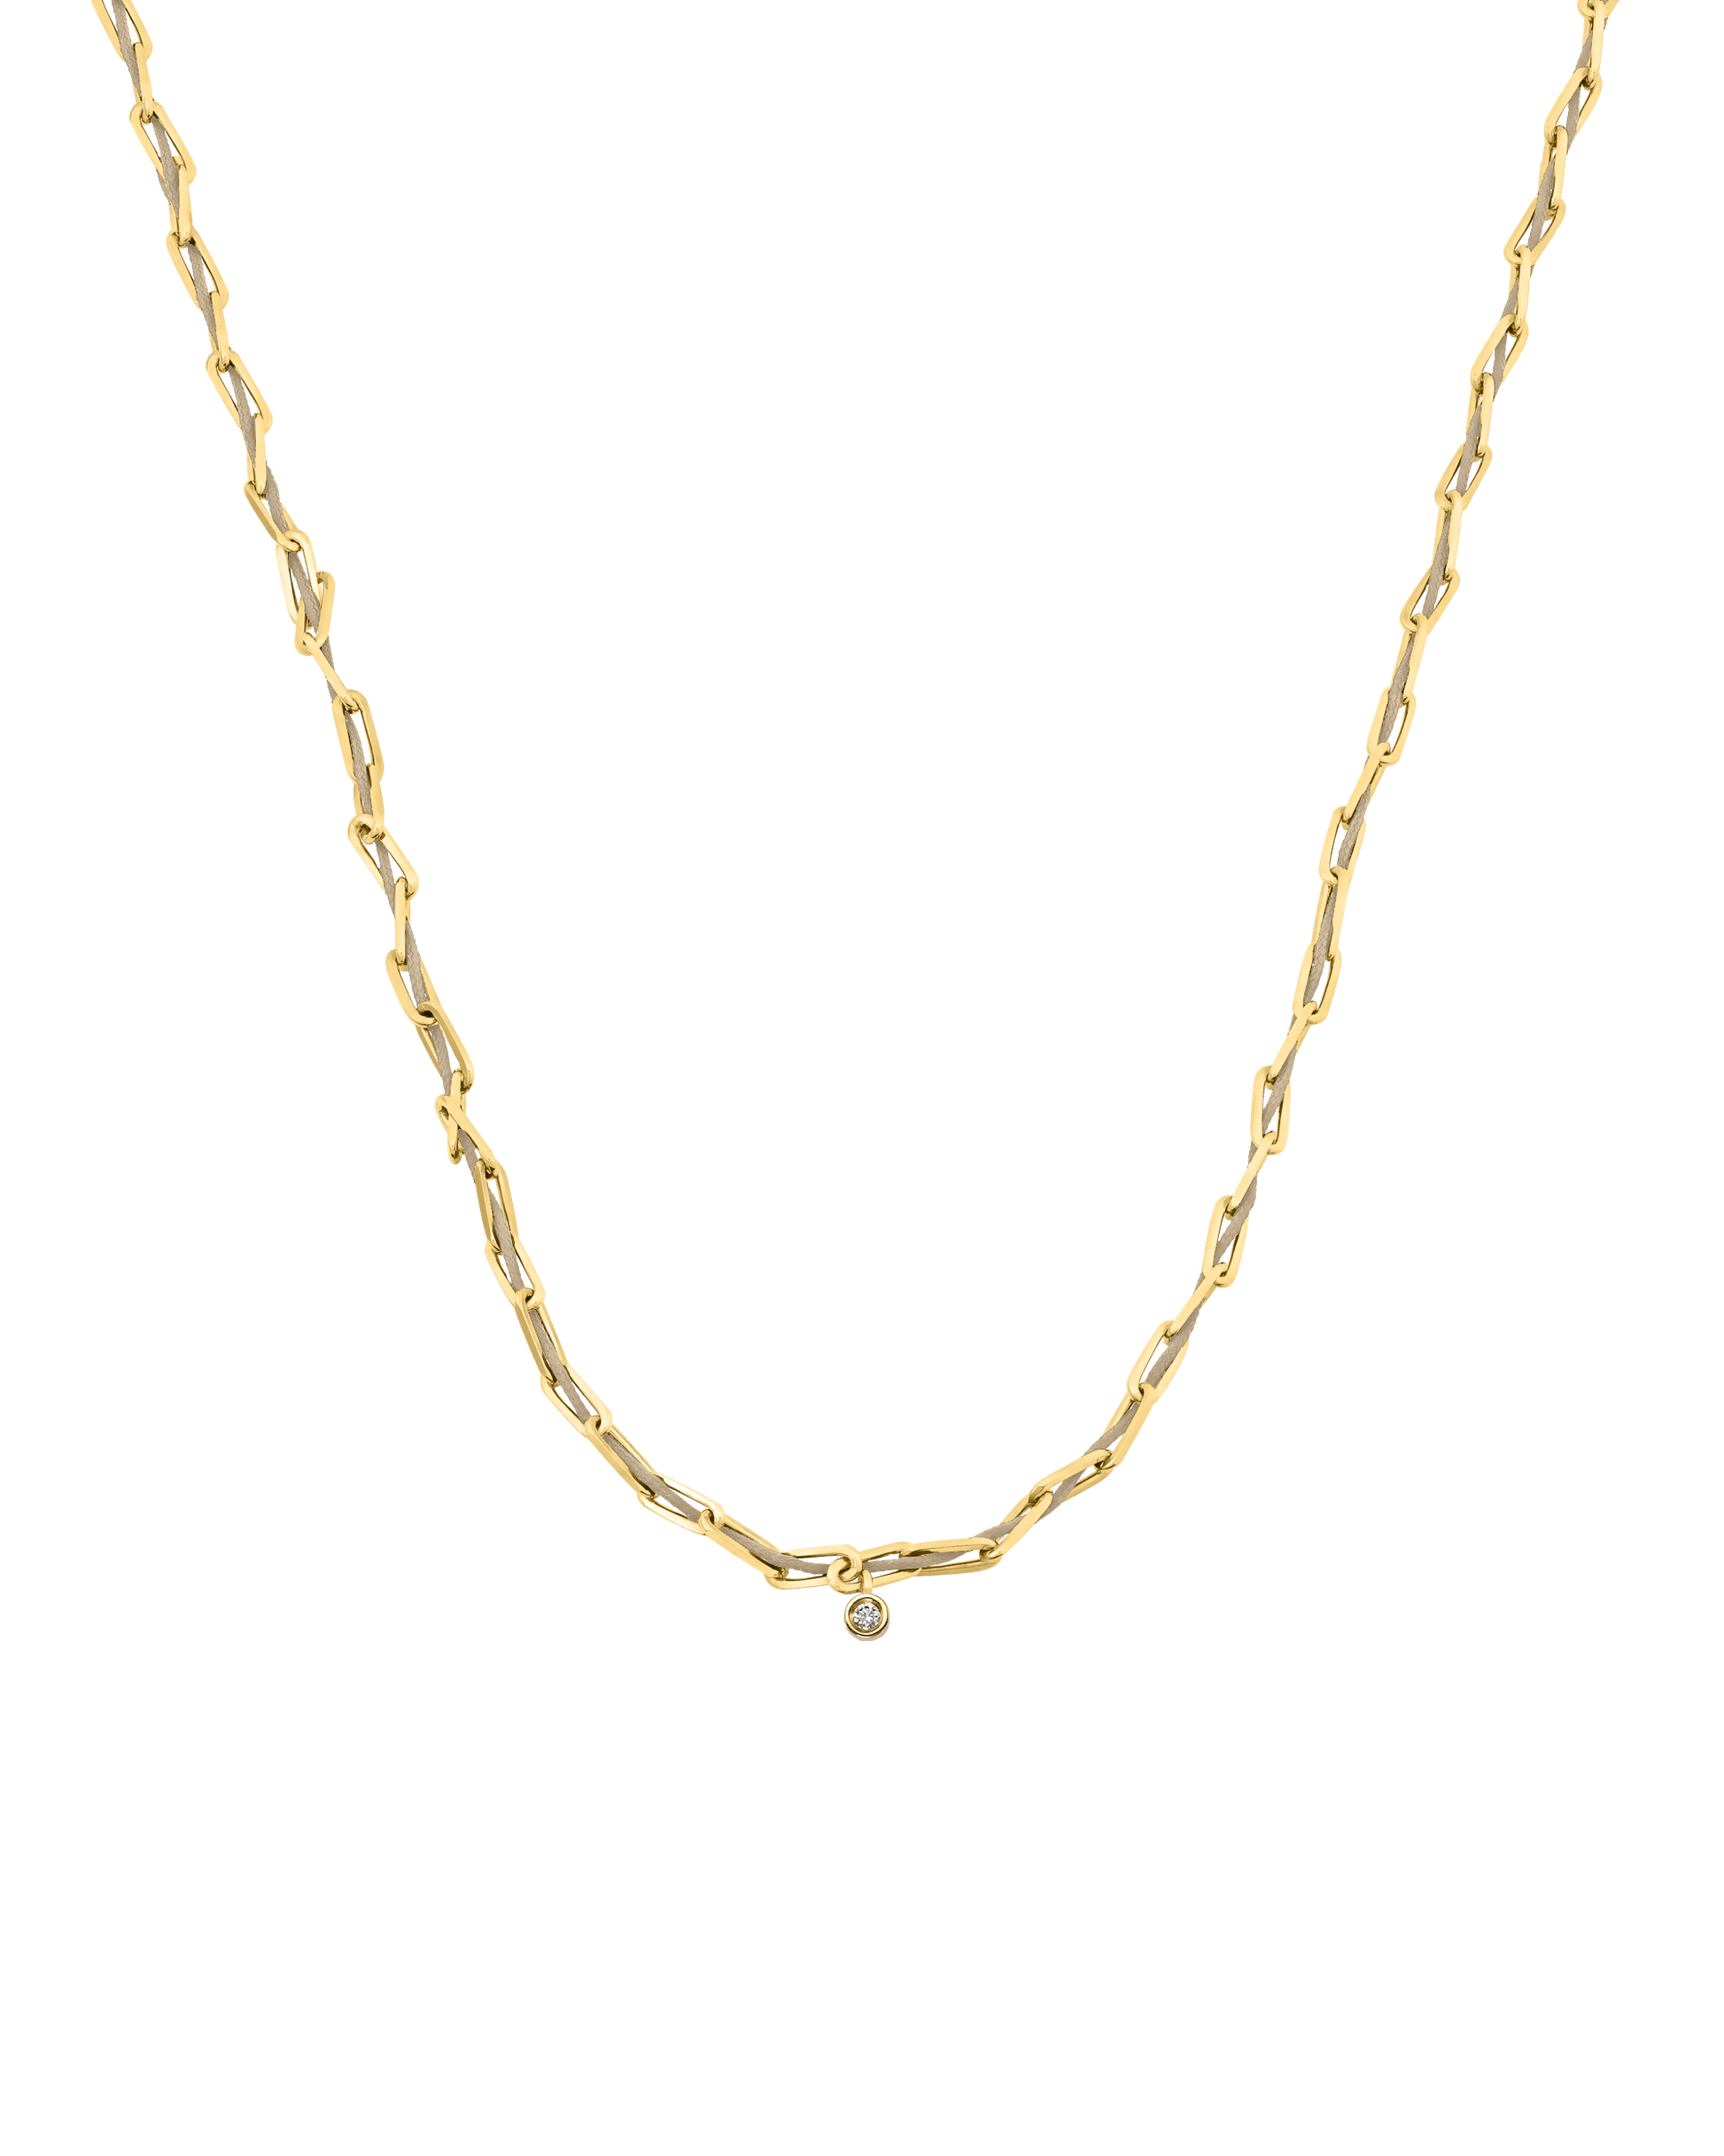 Twine Diamond Necklace - 18K Gold Vermeil Necklaces magal-dev Sand Small: 0.03ct 16"